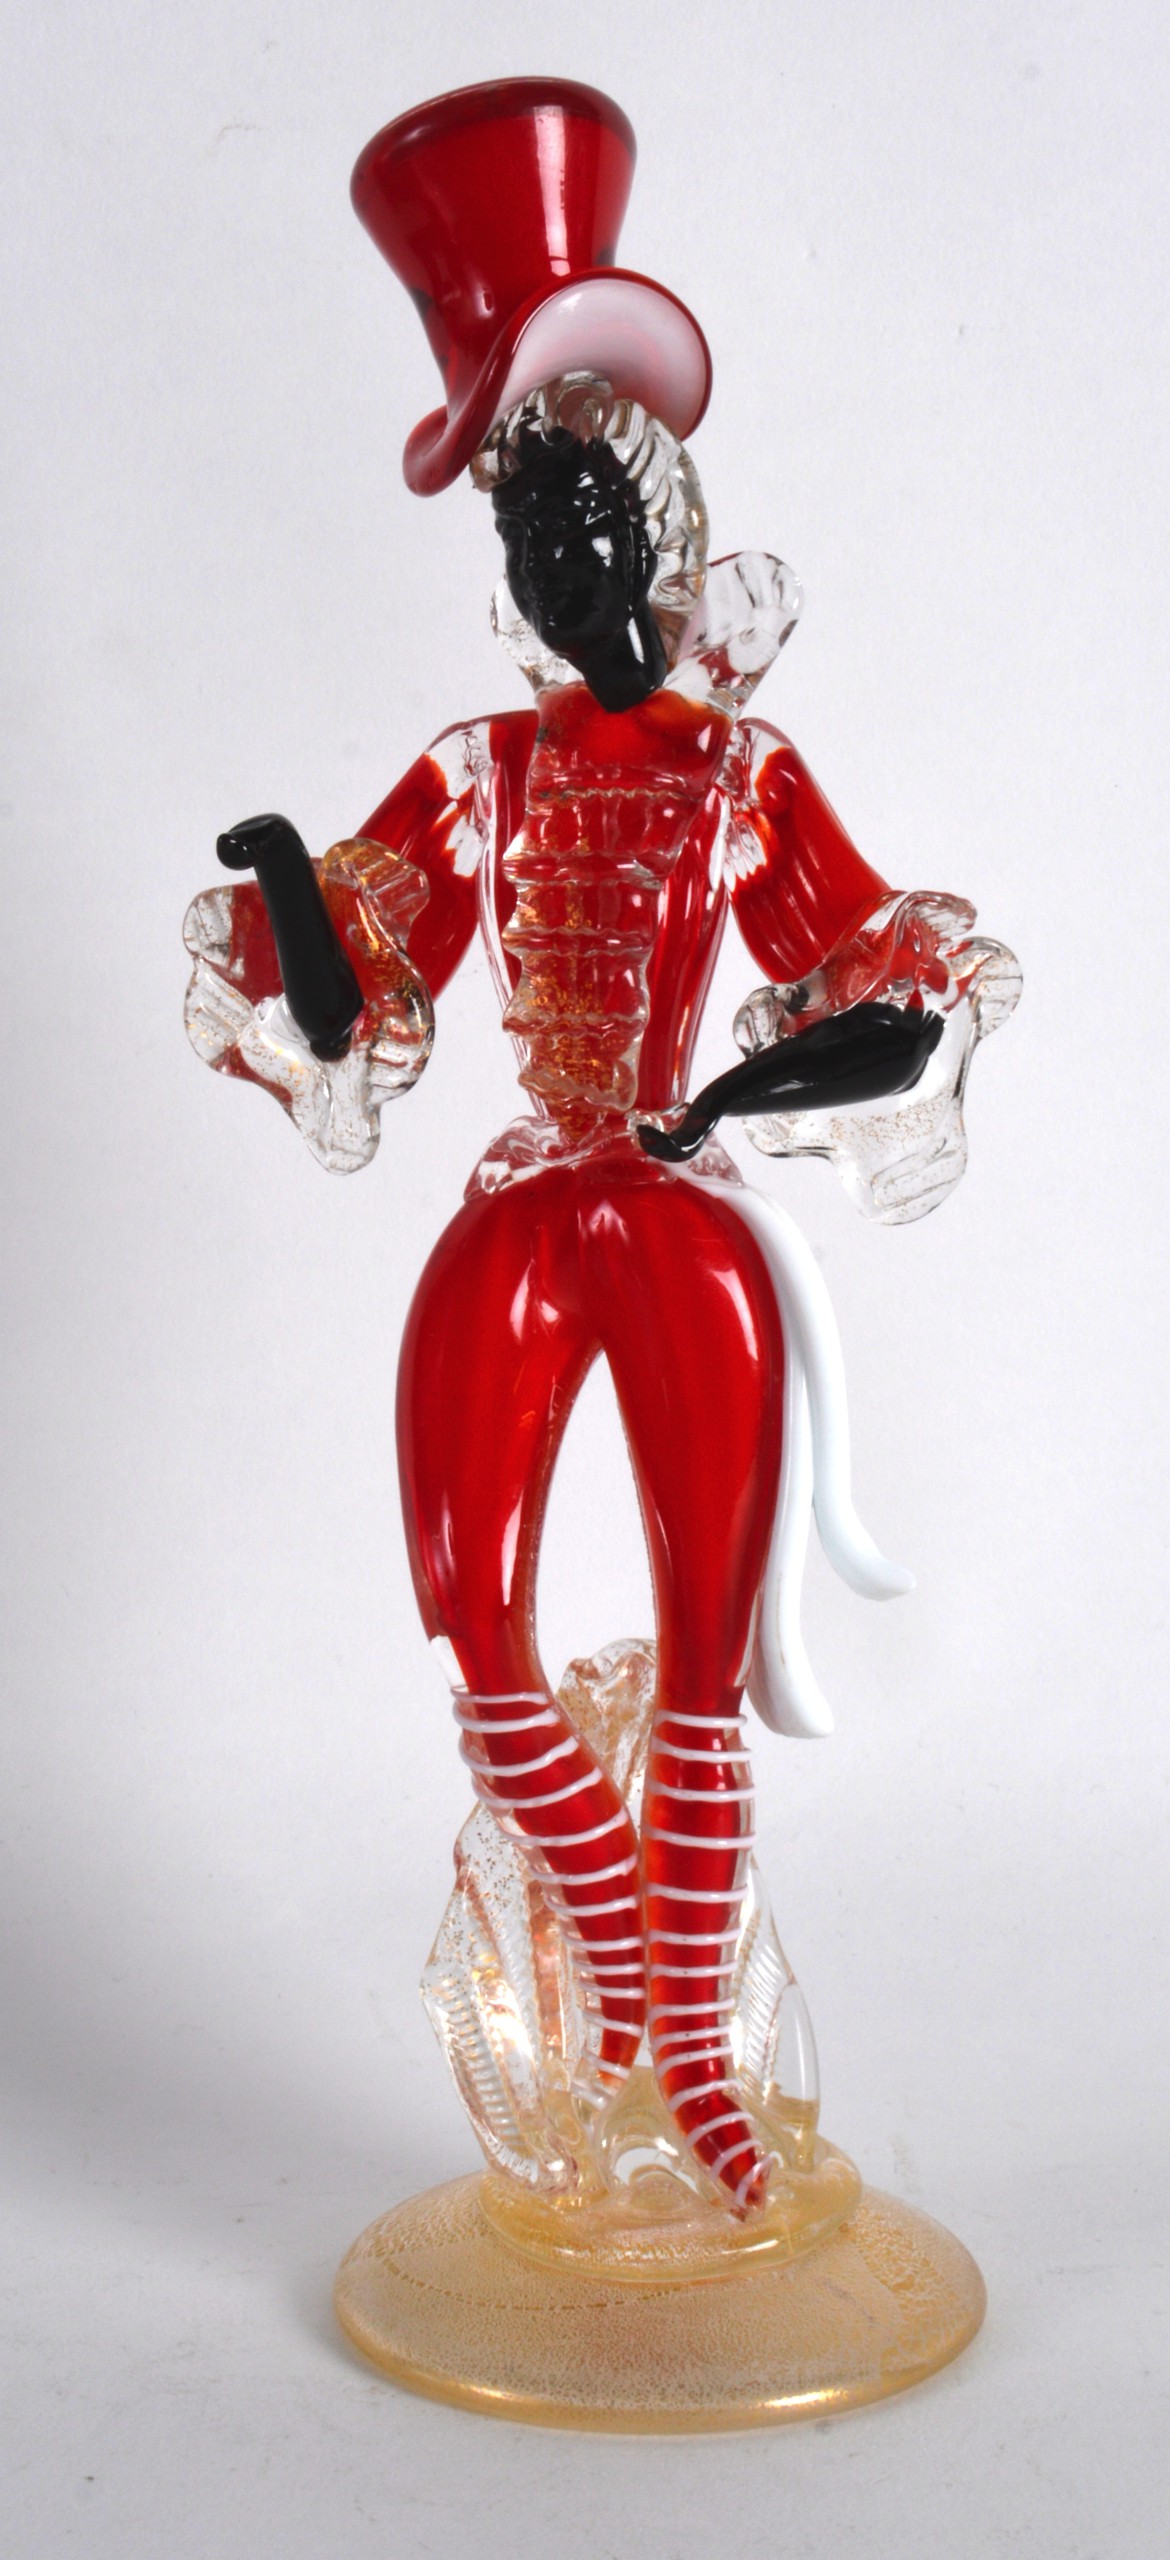 AN UNUSUAL VENETIAN RED AND WHITE GLASS FIGURE modelled wearing a top hat, upon a gilt splashed